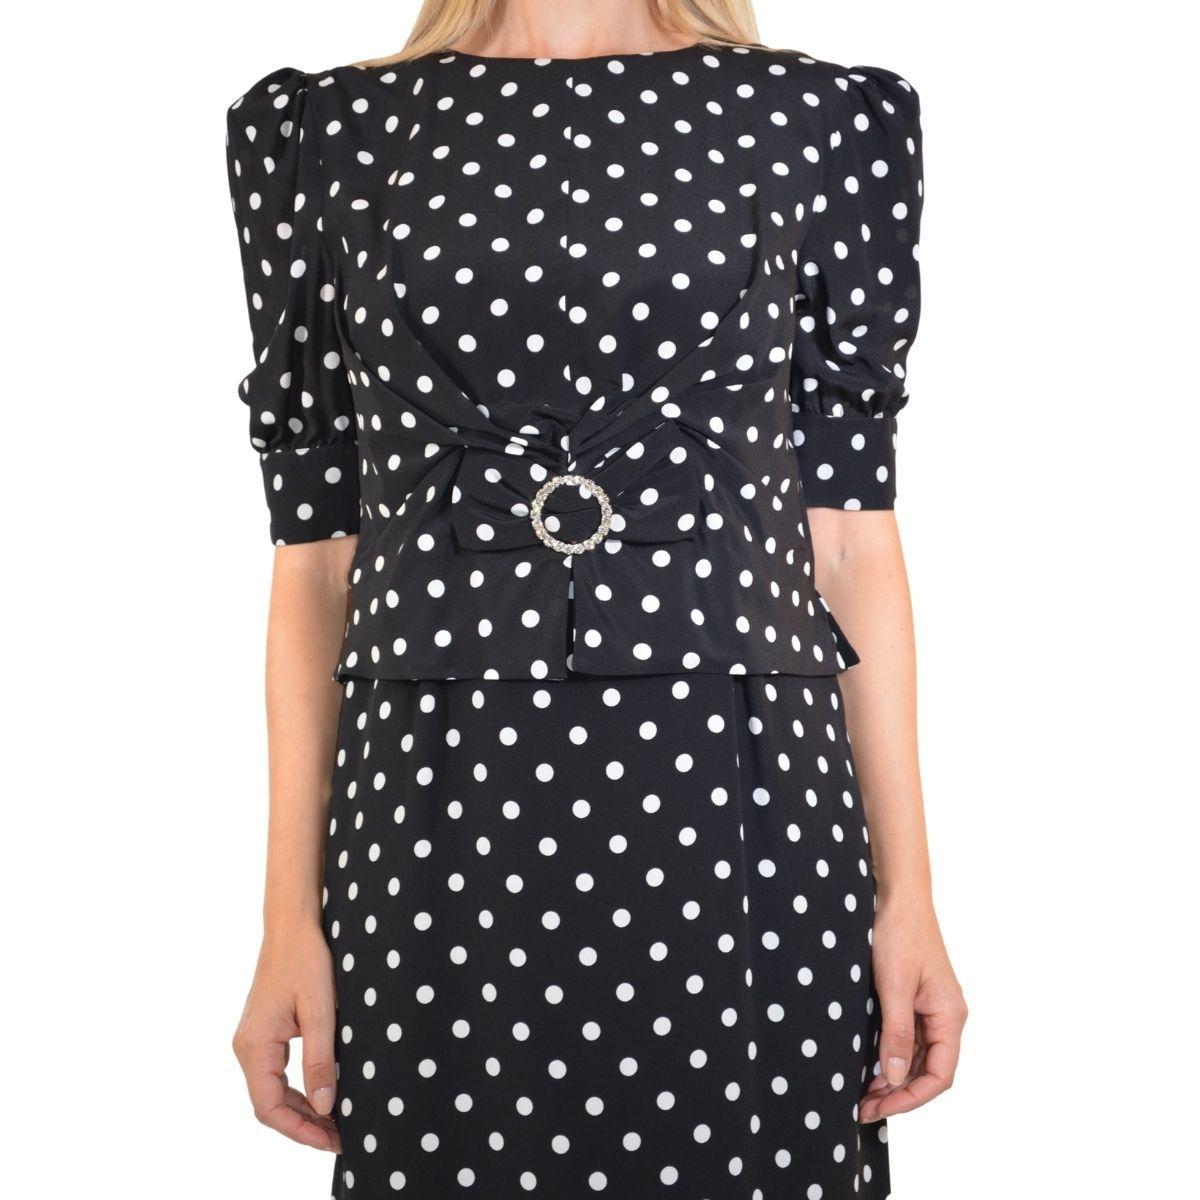 Black silk polka dot fitted dress
Round neck
Back zip fastening
Short sleeves
Belted waist
Rear central vent
Mid-length.
Composition: Silk 100%
Lining: Polyamide 100%, Cupro 100%
Made in Italy